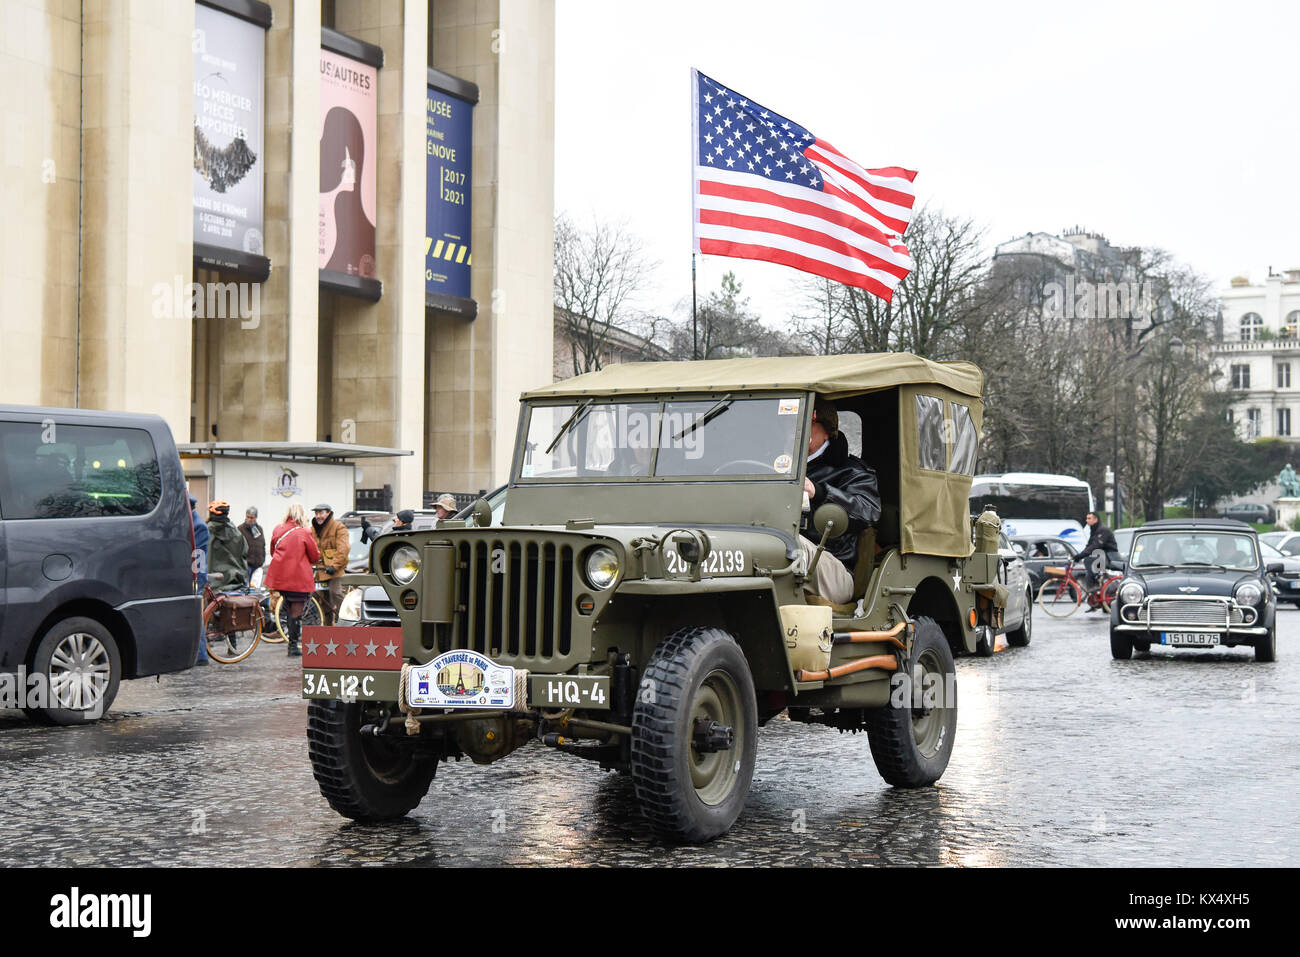 Paris. 7th Jan, 2018. A vintage jeep with a flag of the U.S. passes the Trocadero Square in Paris, France on Jan. 7, 2018. Hundreds of vintage cars, racing cars, jeeps, buses, motorcycles and bikes participated on Sunday in the 18th Paris Crossing of Classic Cars. Credit: Chen Yichen/Xinhua/Alamy Live News Stock Photo